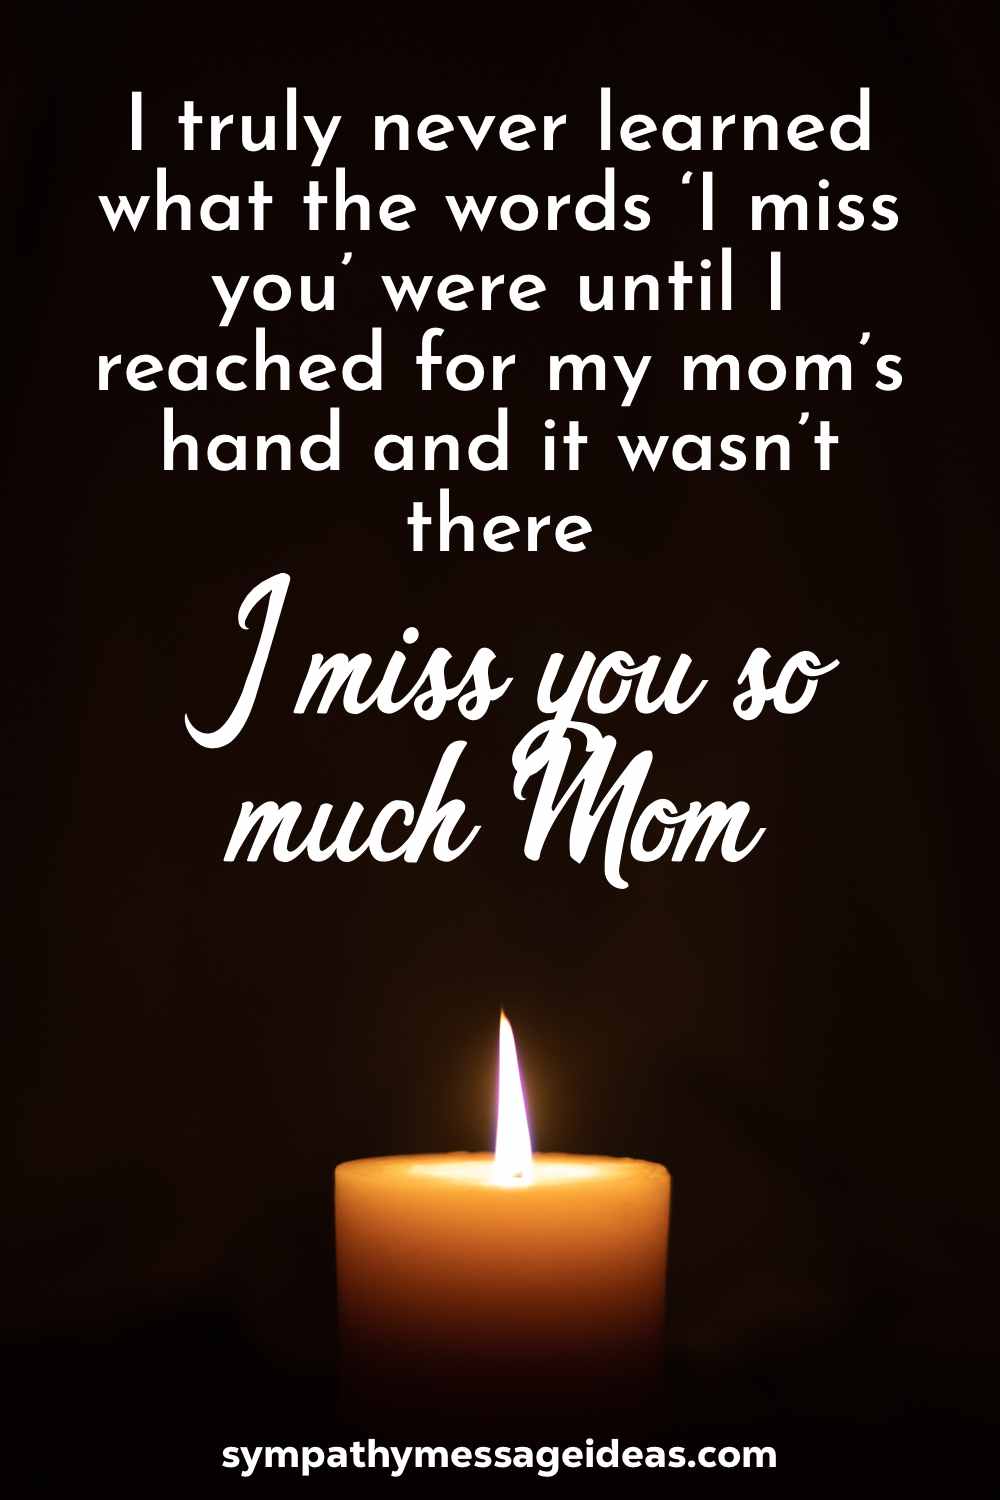 50 Touching I Miss You Mom Quotes and Messages - Sympathy Message ...